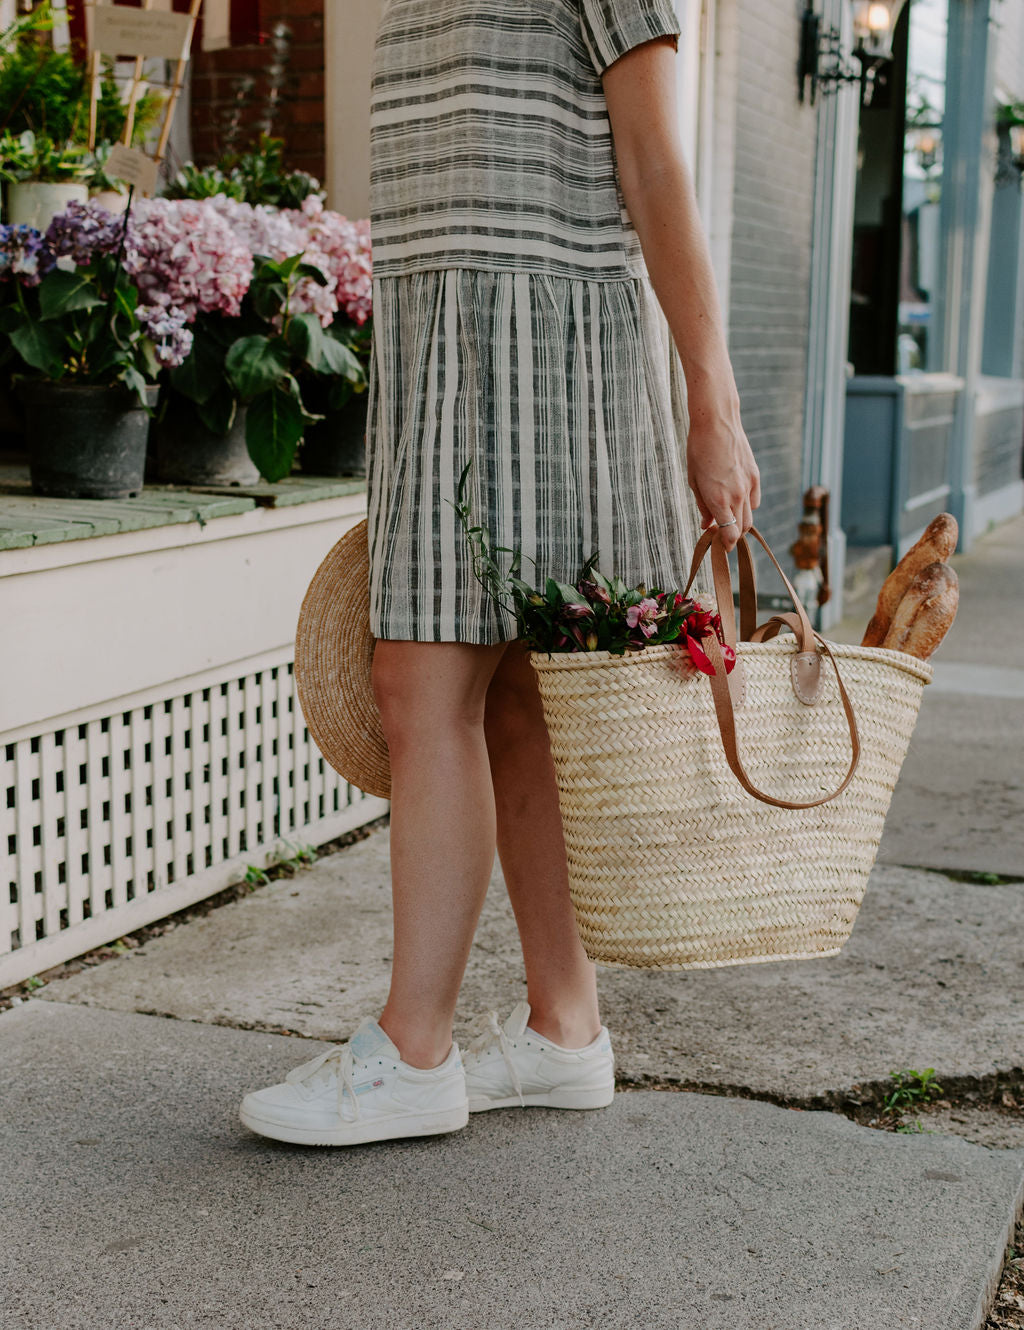 The Classic French Market Bag